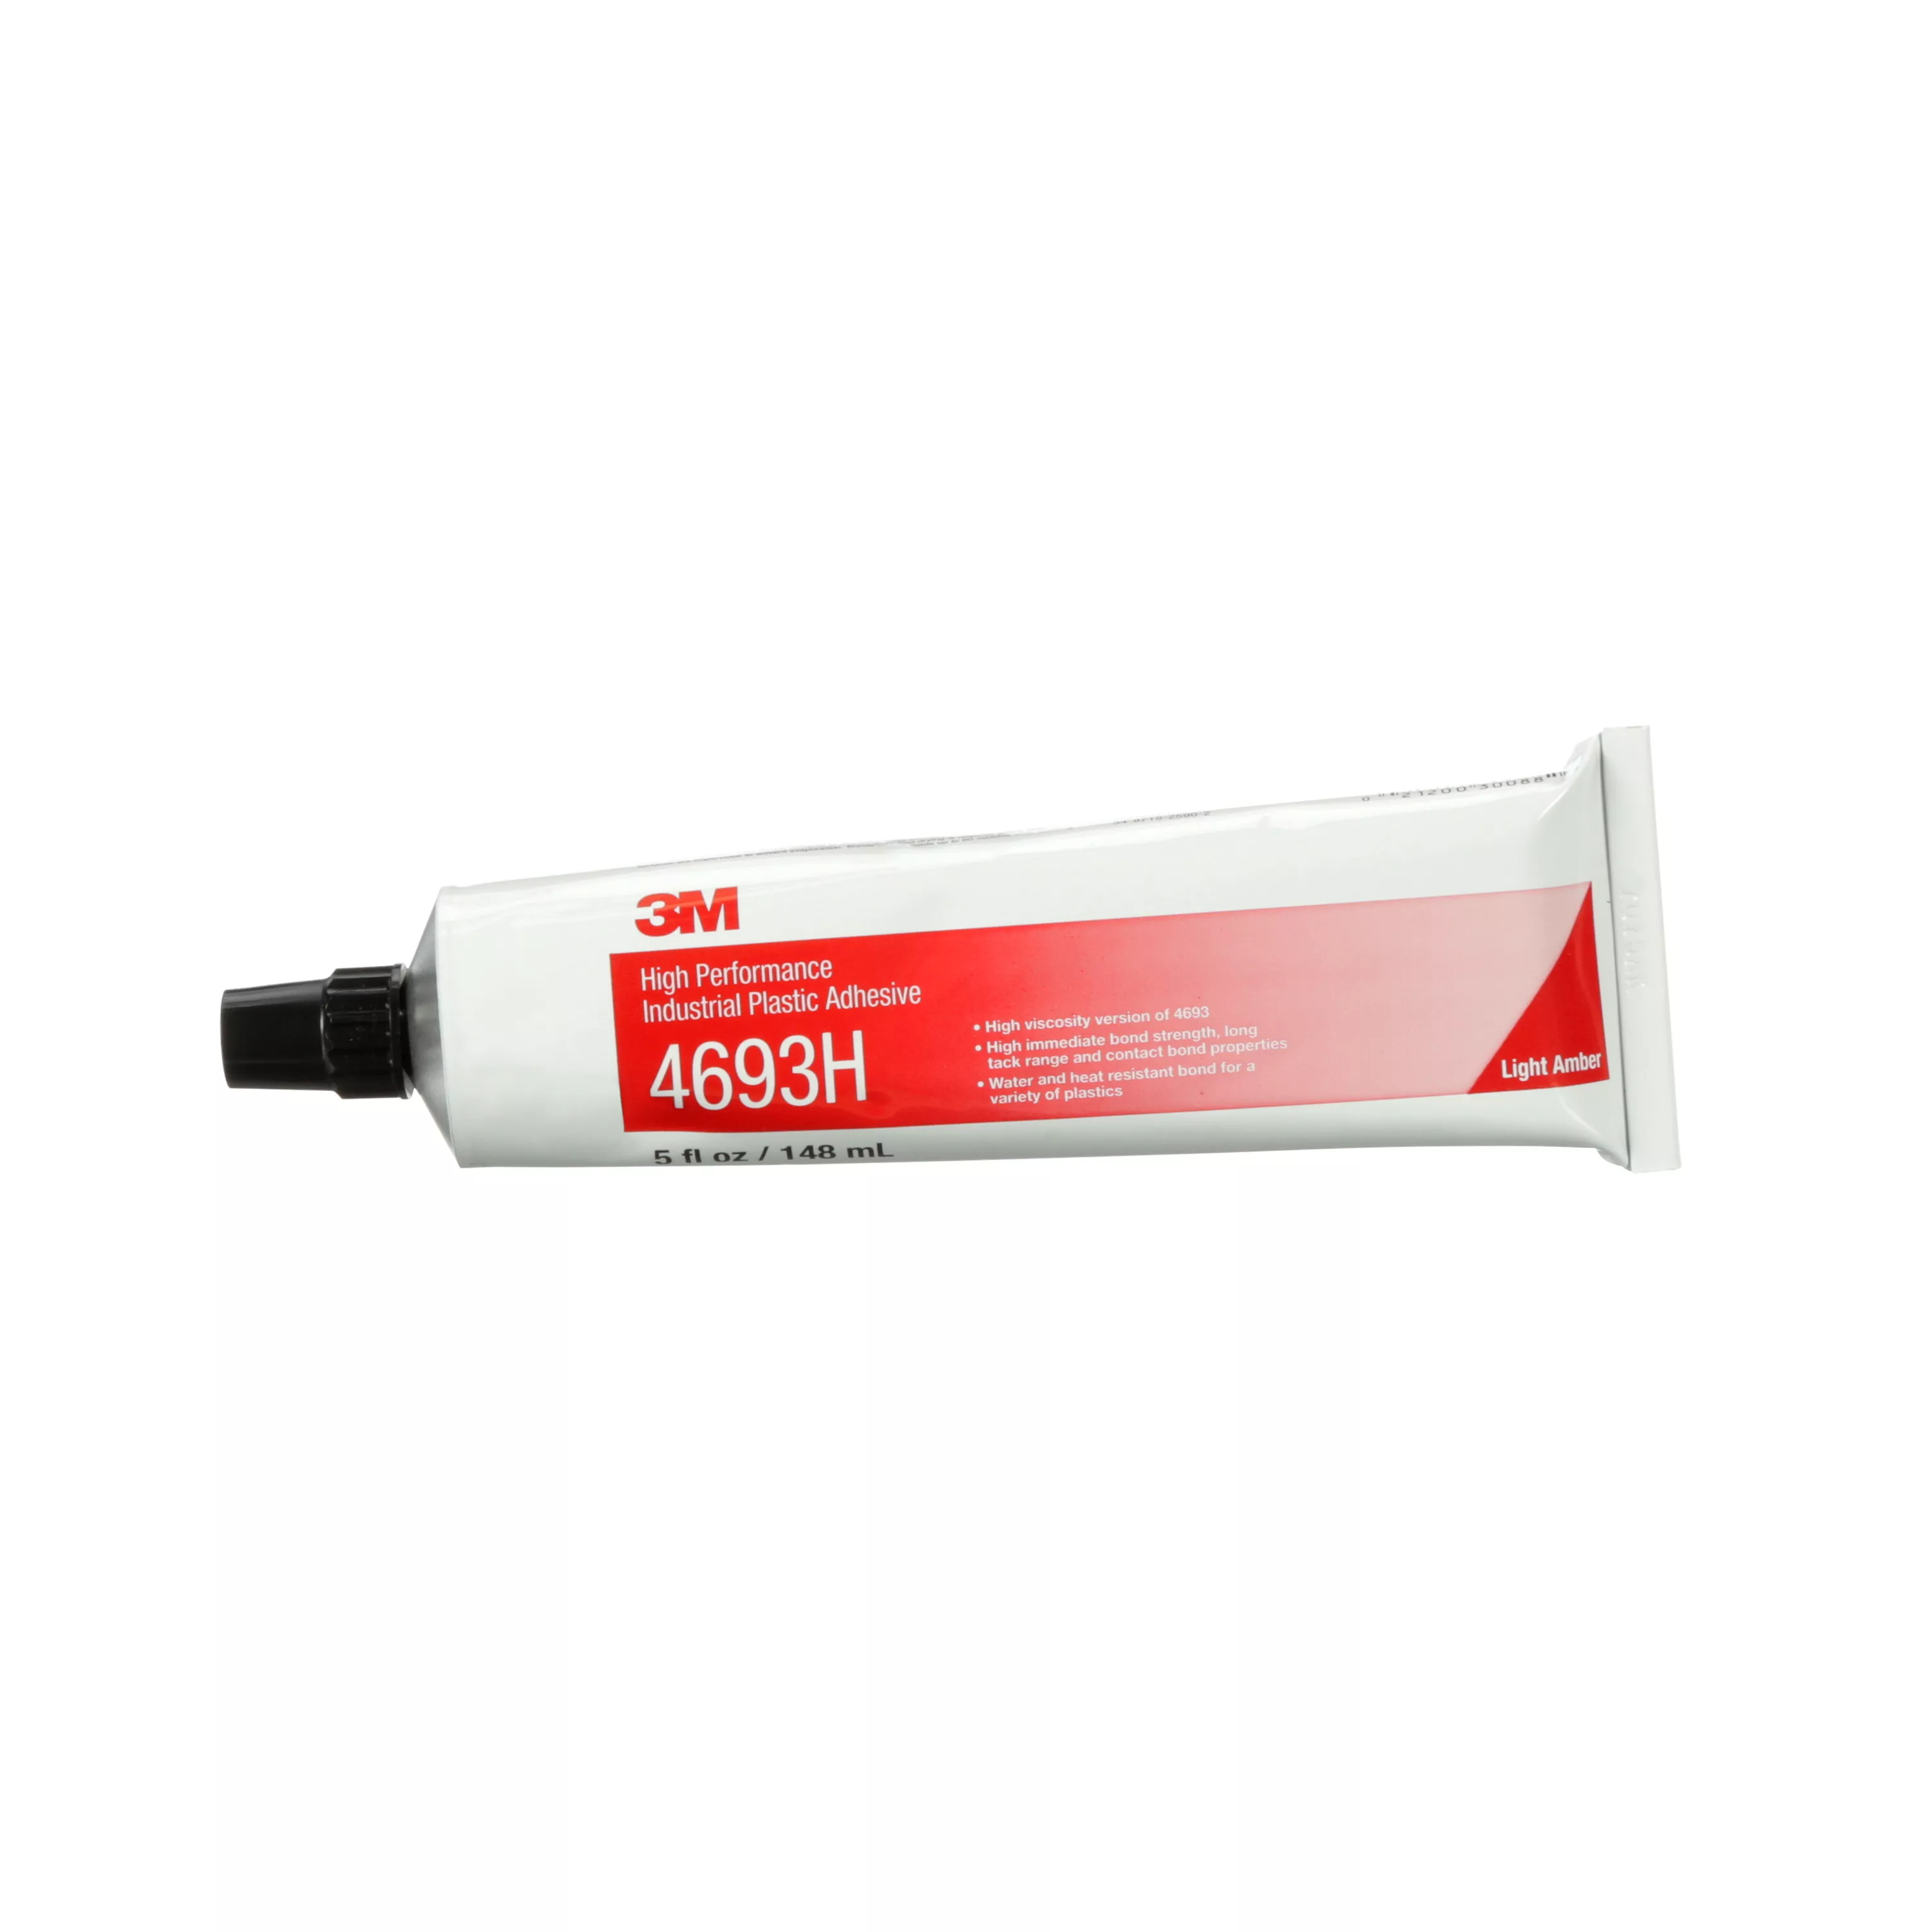 3M™ High Performance Industrial Plastic Adhesive 4693H, Light Amber, 5
oz Tube, 36 Each/Case